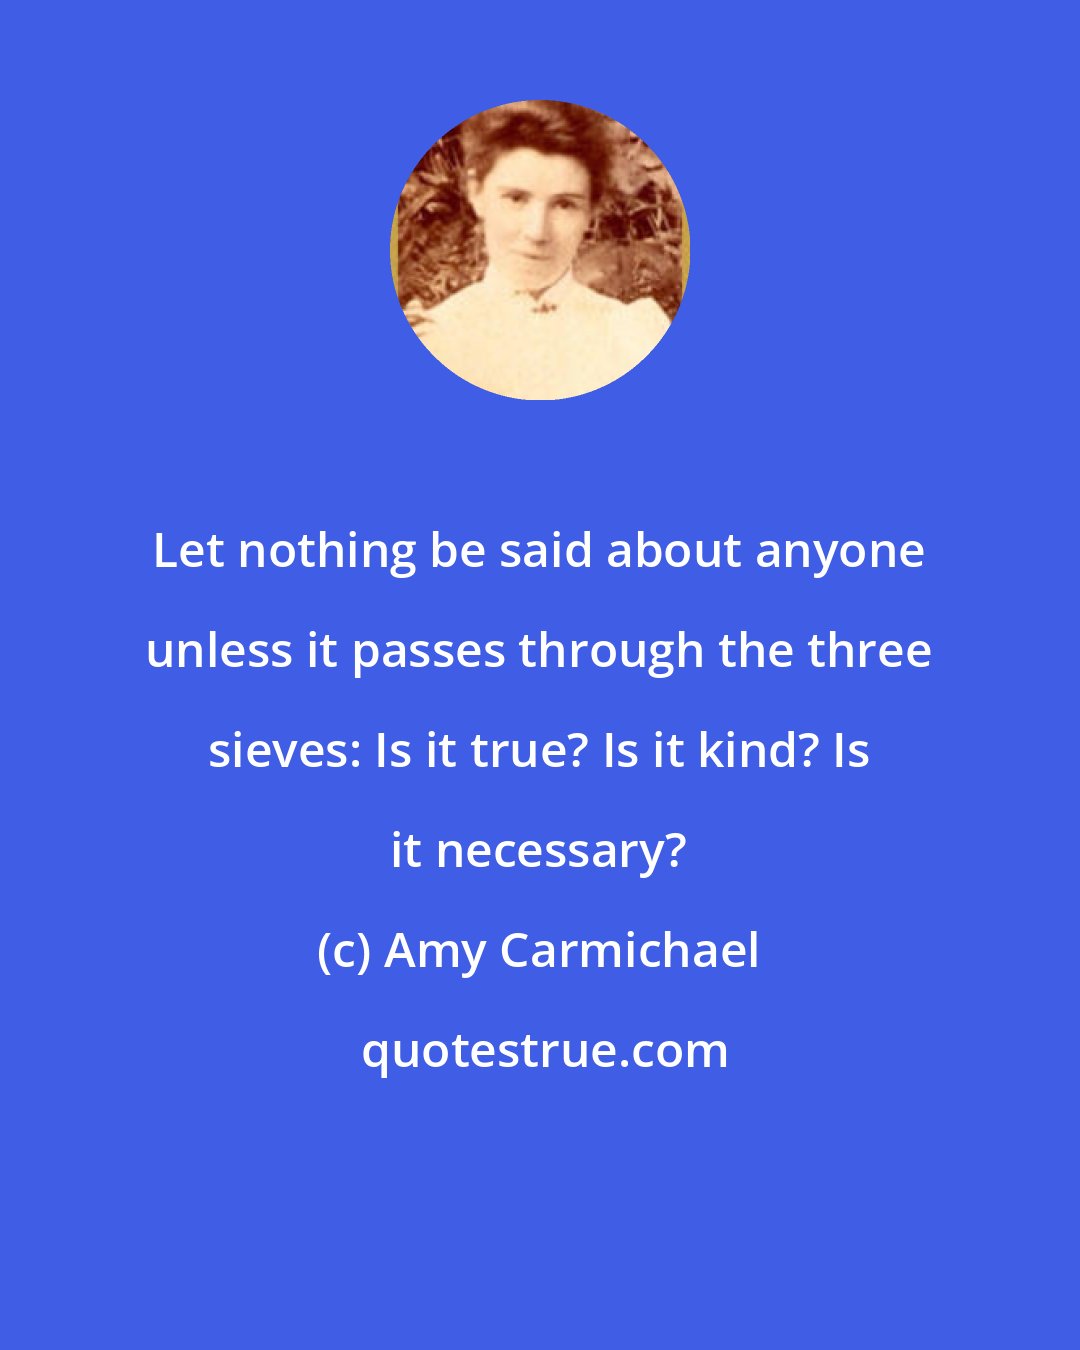 Amy Carmichael: Let nothing be said about anyone unless it passes through the three sieves: Is it true? Is it kind? Is it necessary?